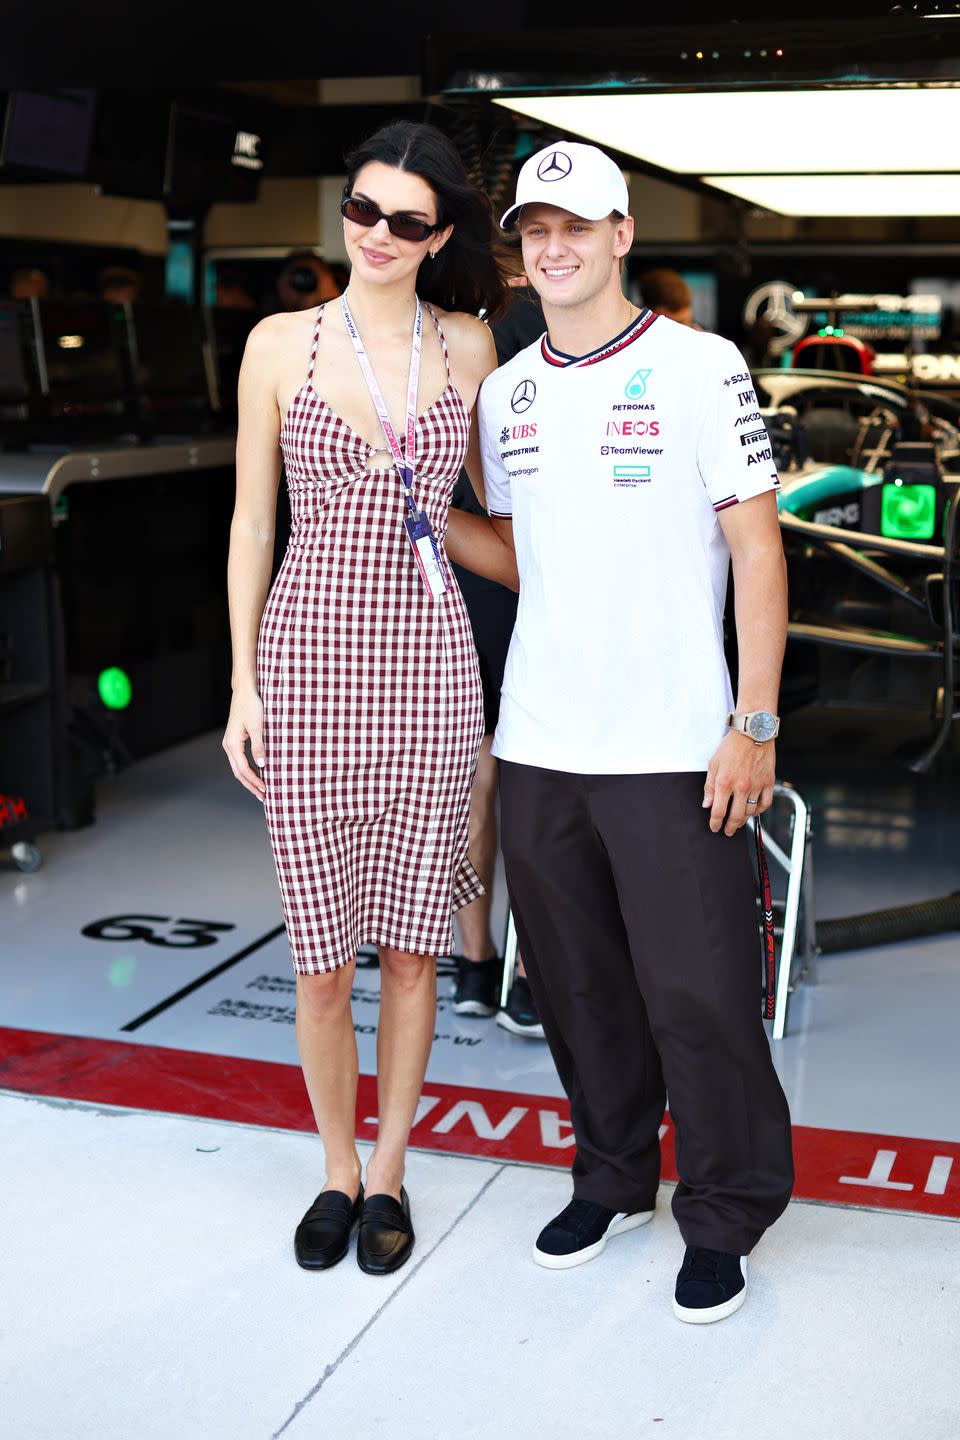 miami, florida may 03 kendall jenner and mick schumacher of germany, reserve driver of mercedes pose for a photo in the mercedes garage during practice prior to round 2 miami of the f1 academy at miami international autodrome on may 03, 2024 in miami, florida photo by clive rose formula 1formula 1 via getty images